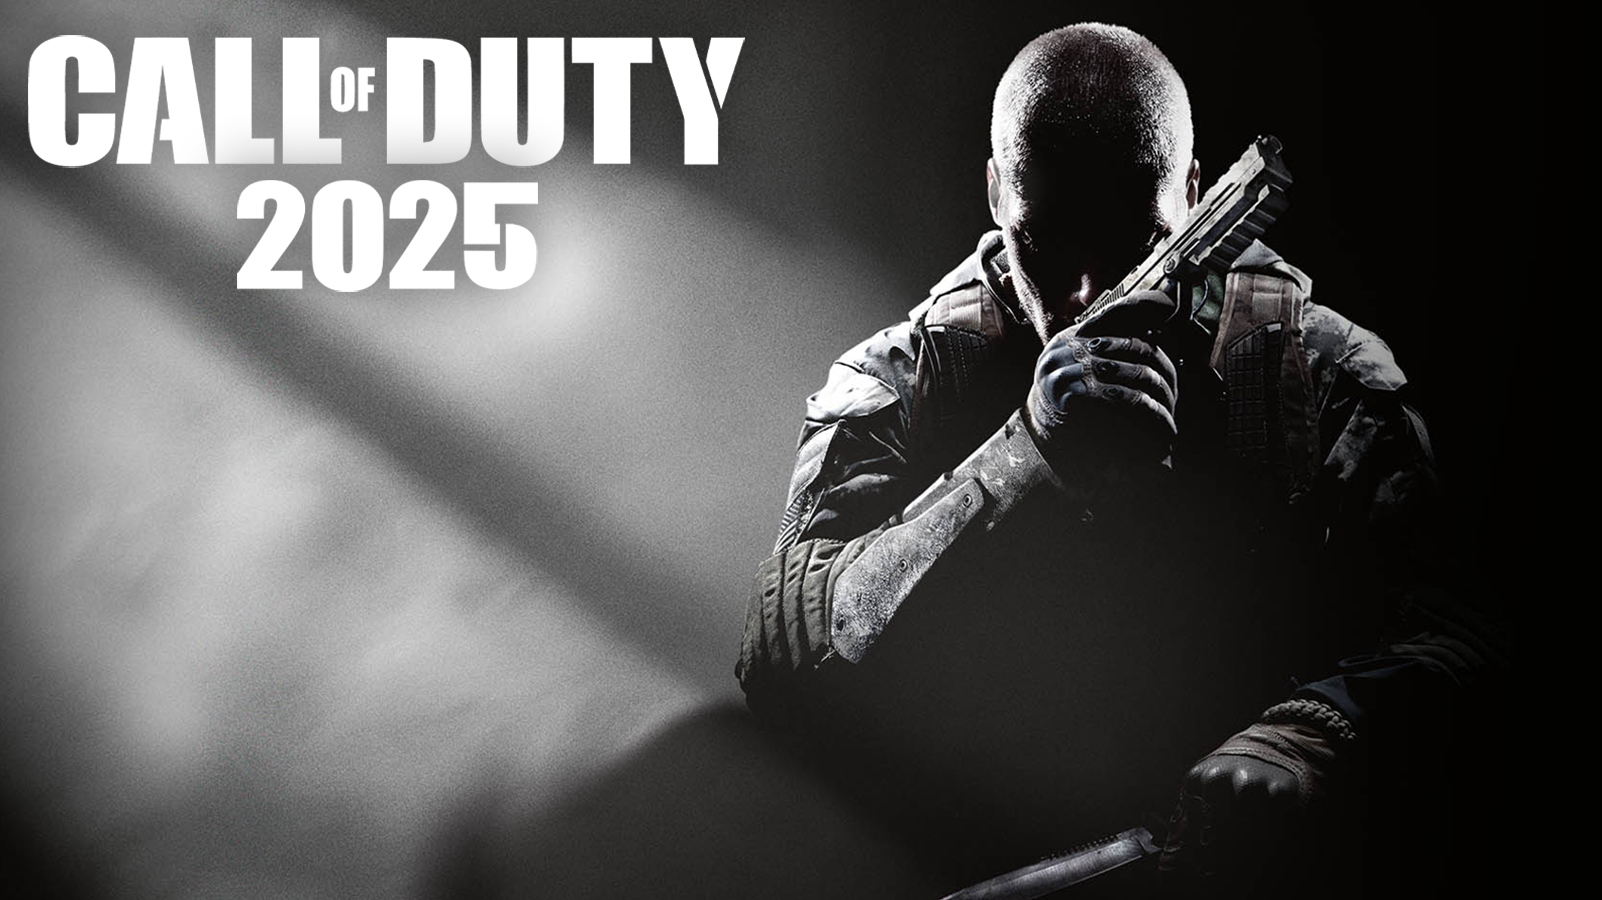 Call of Duty 2025 Early reports tease Black Ops 2 sequel, future